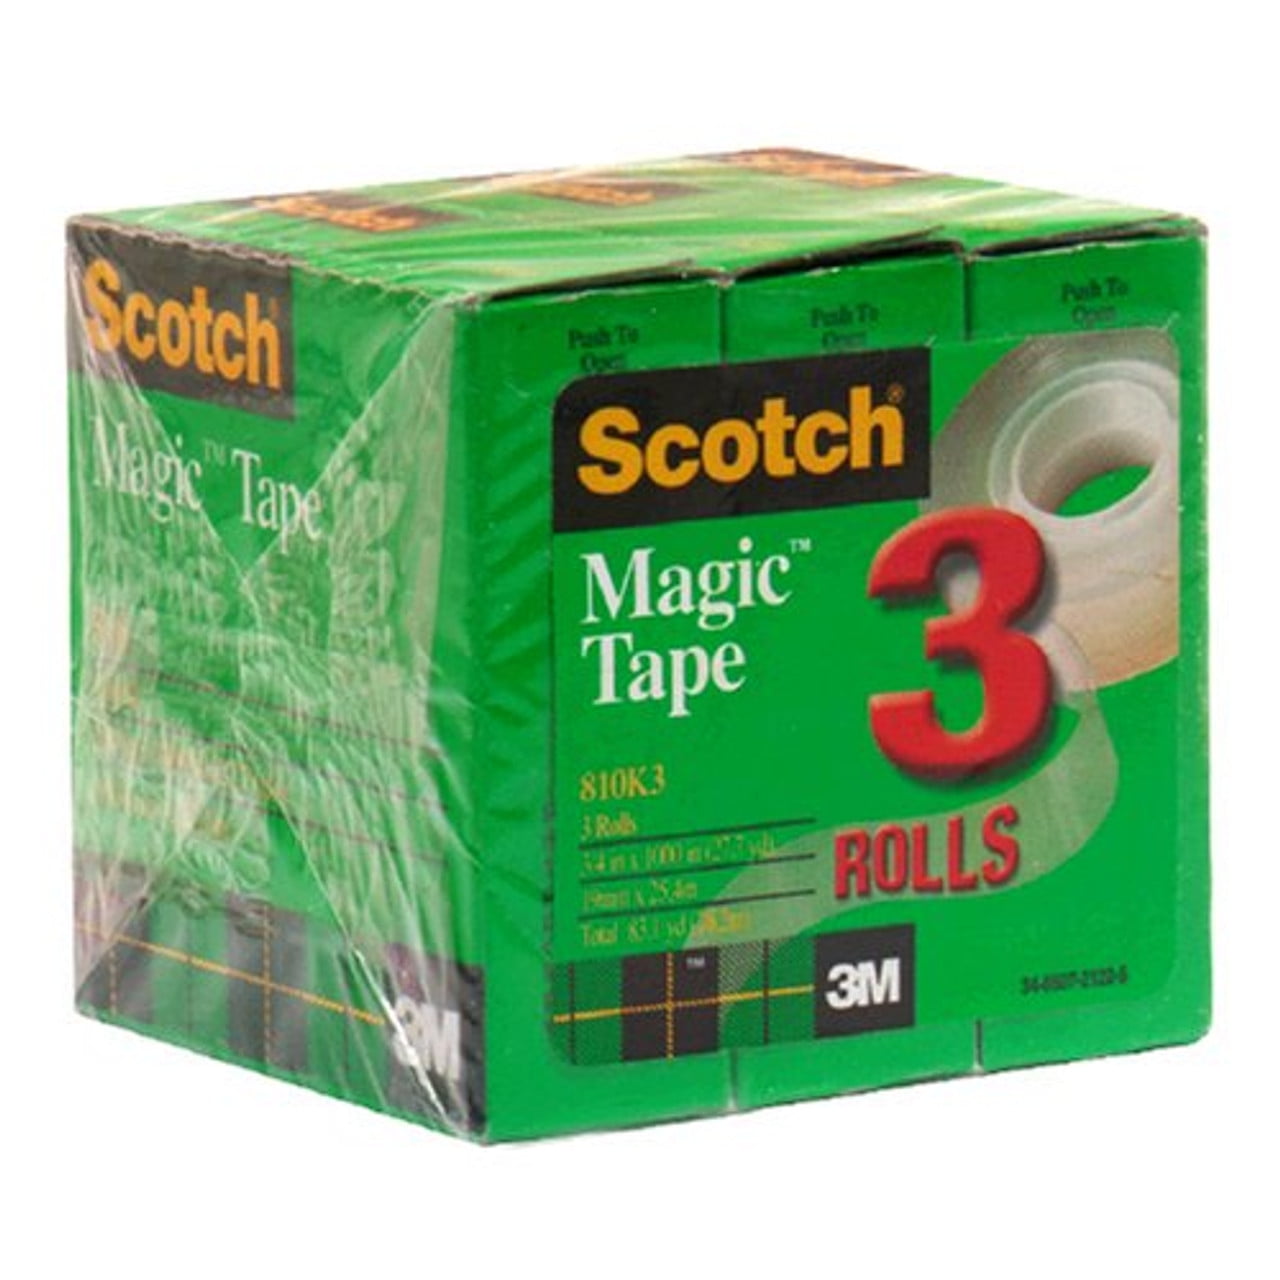 Scotch Single Sided Permanent Tape, Clear, 3/4 x 400, 1